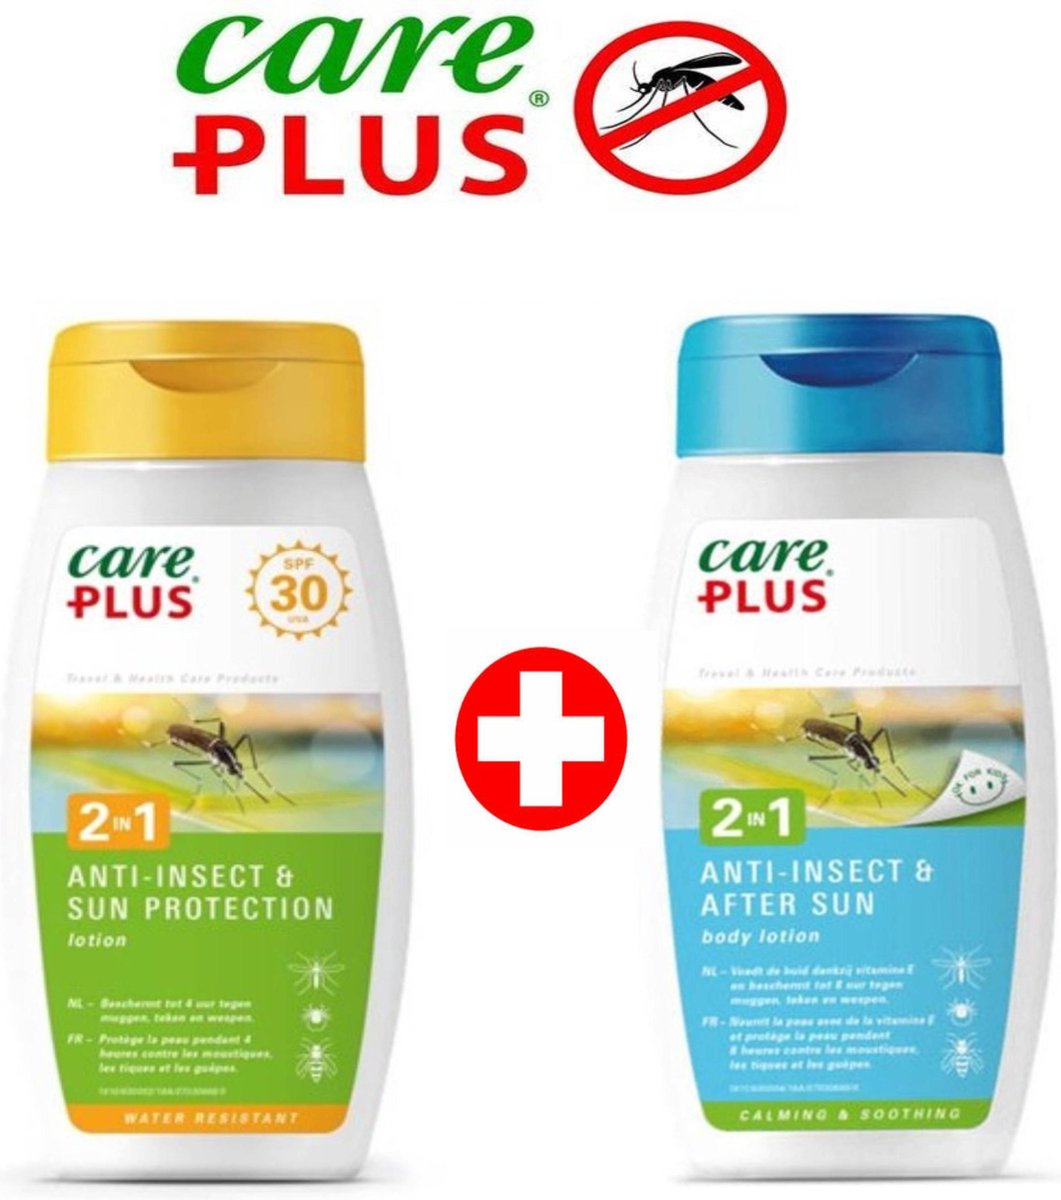 Care Plus 2 in 1 Anti-Insect & Sun Protection / 2in1 Anti-Insect & After  Sun body lotion | bol.com